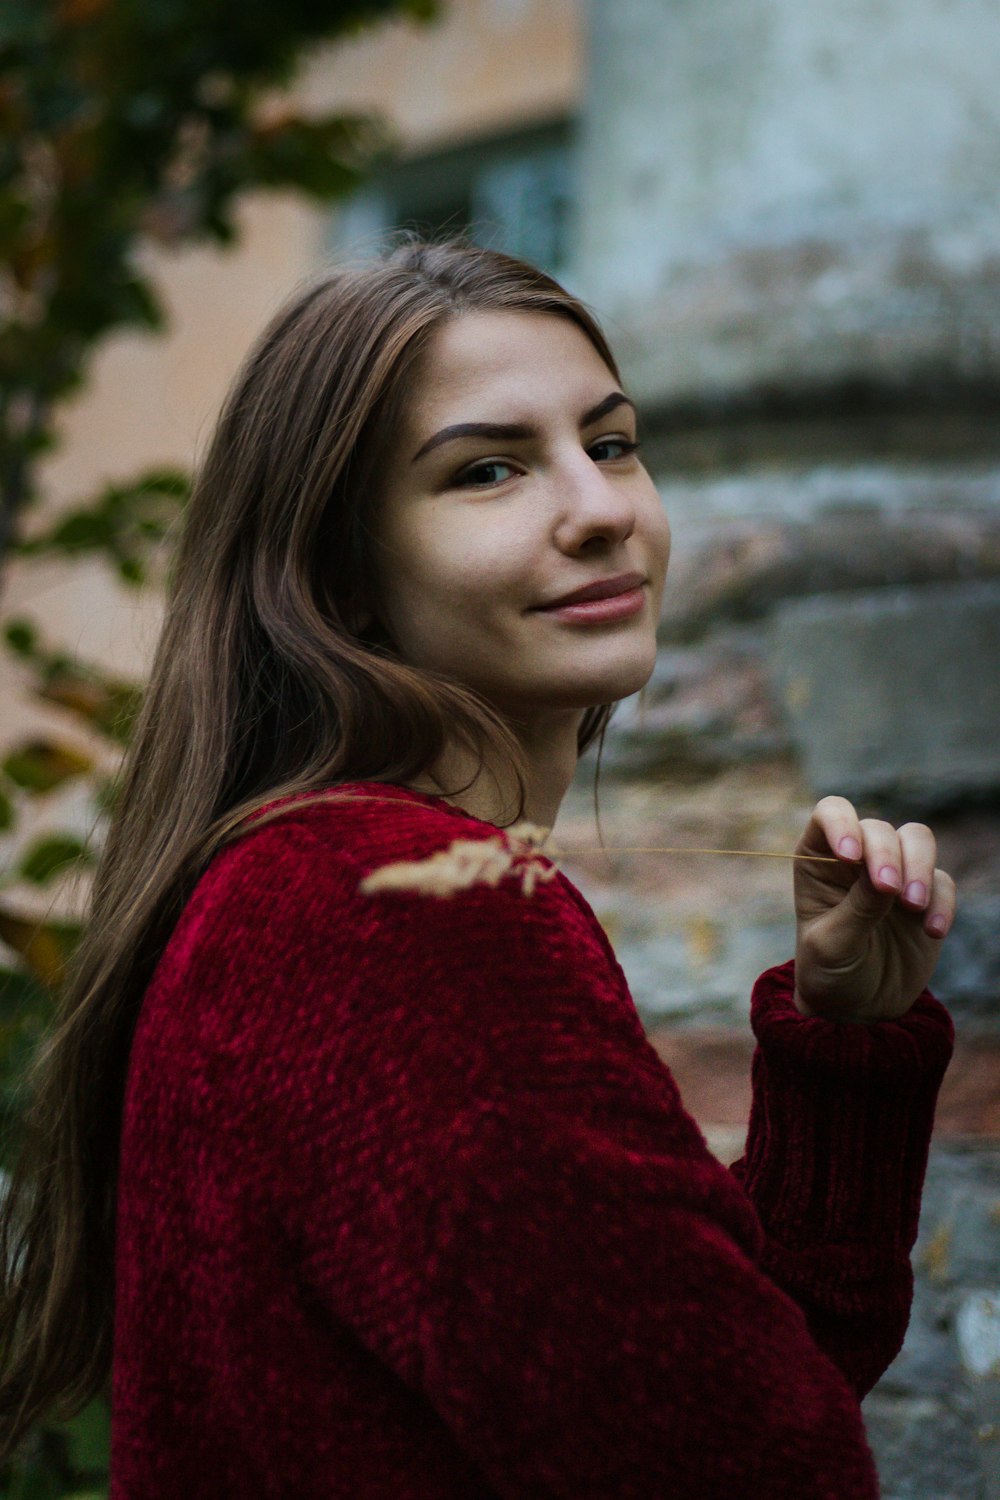 shallow focus photo of woman in maroon sweater